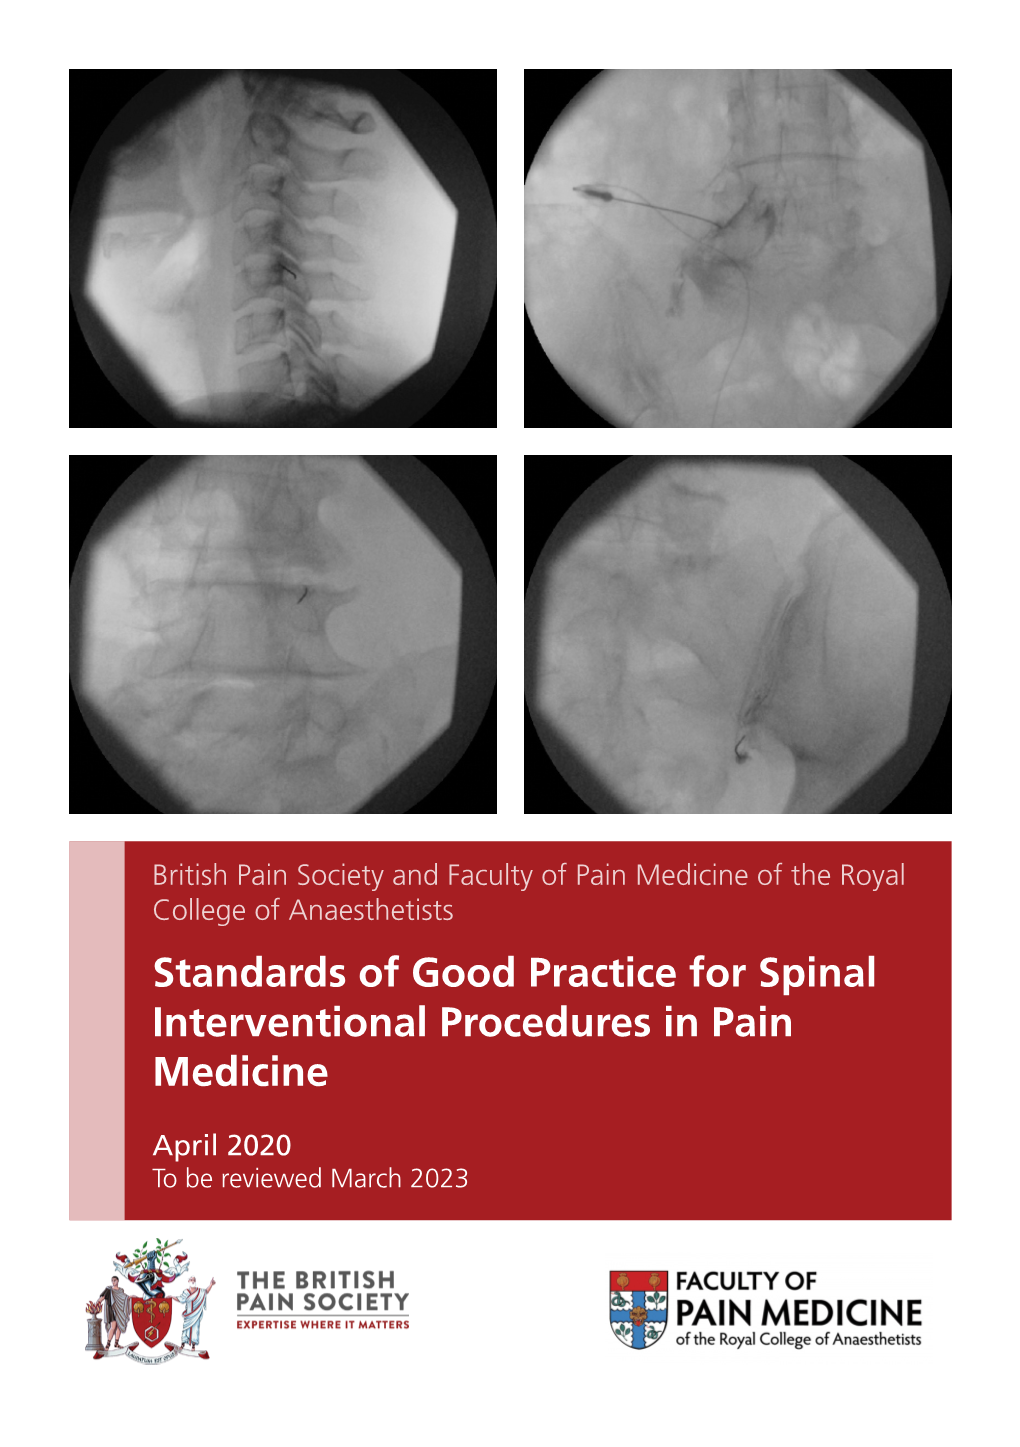 Standards of Good Practice for Spinal Interventional Procedures in Pain Medicine